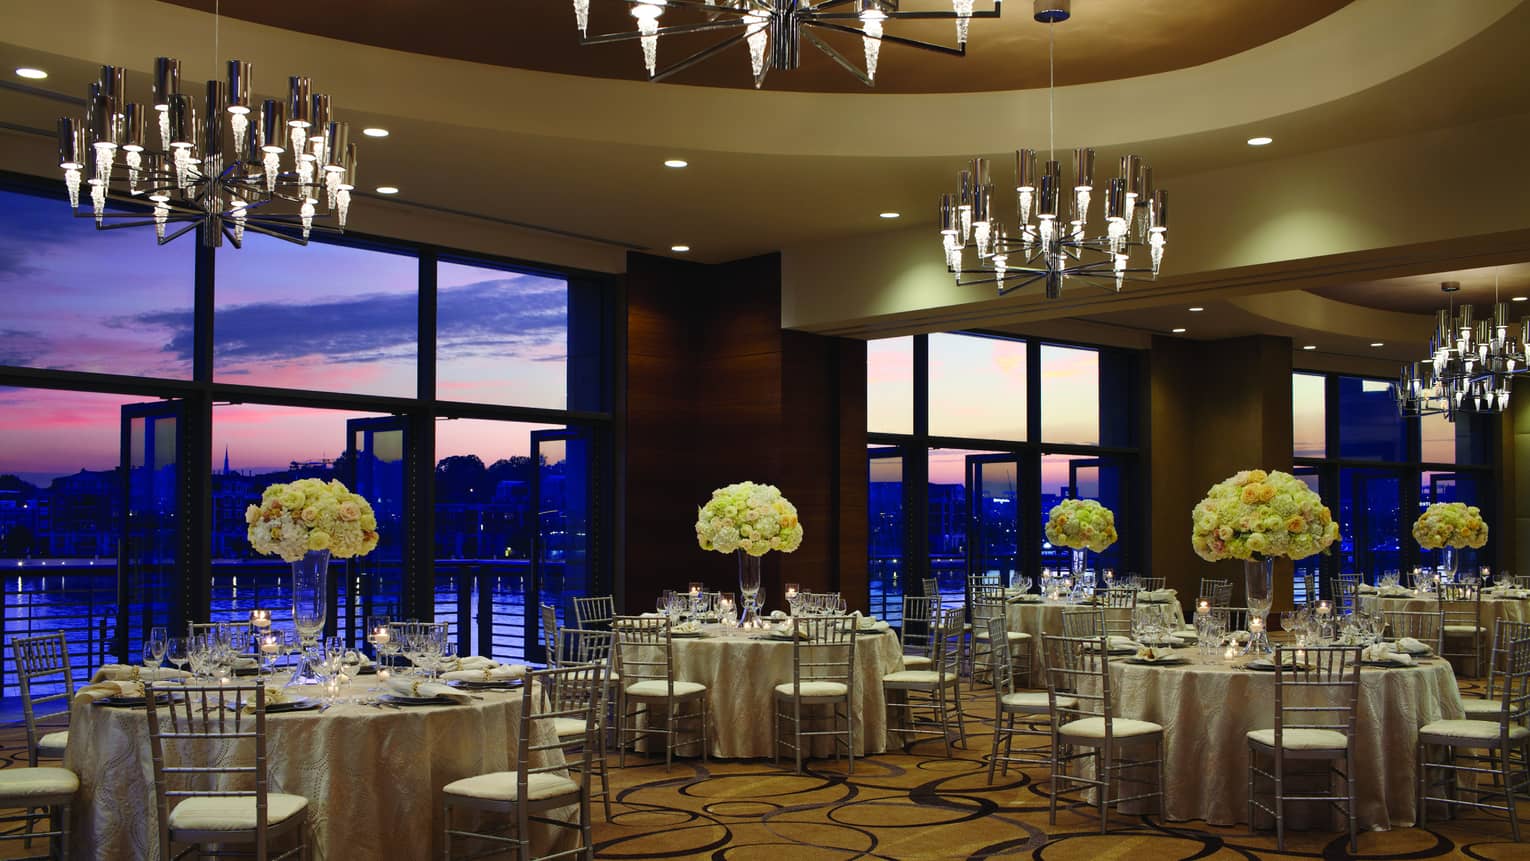 Ballroom banquet dining tables under chandeliers and large windows with sunset Harbor views 